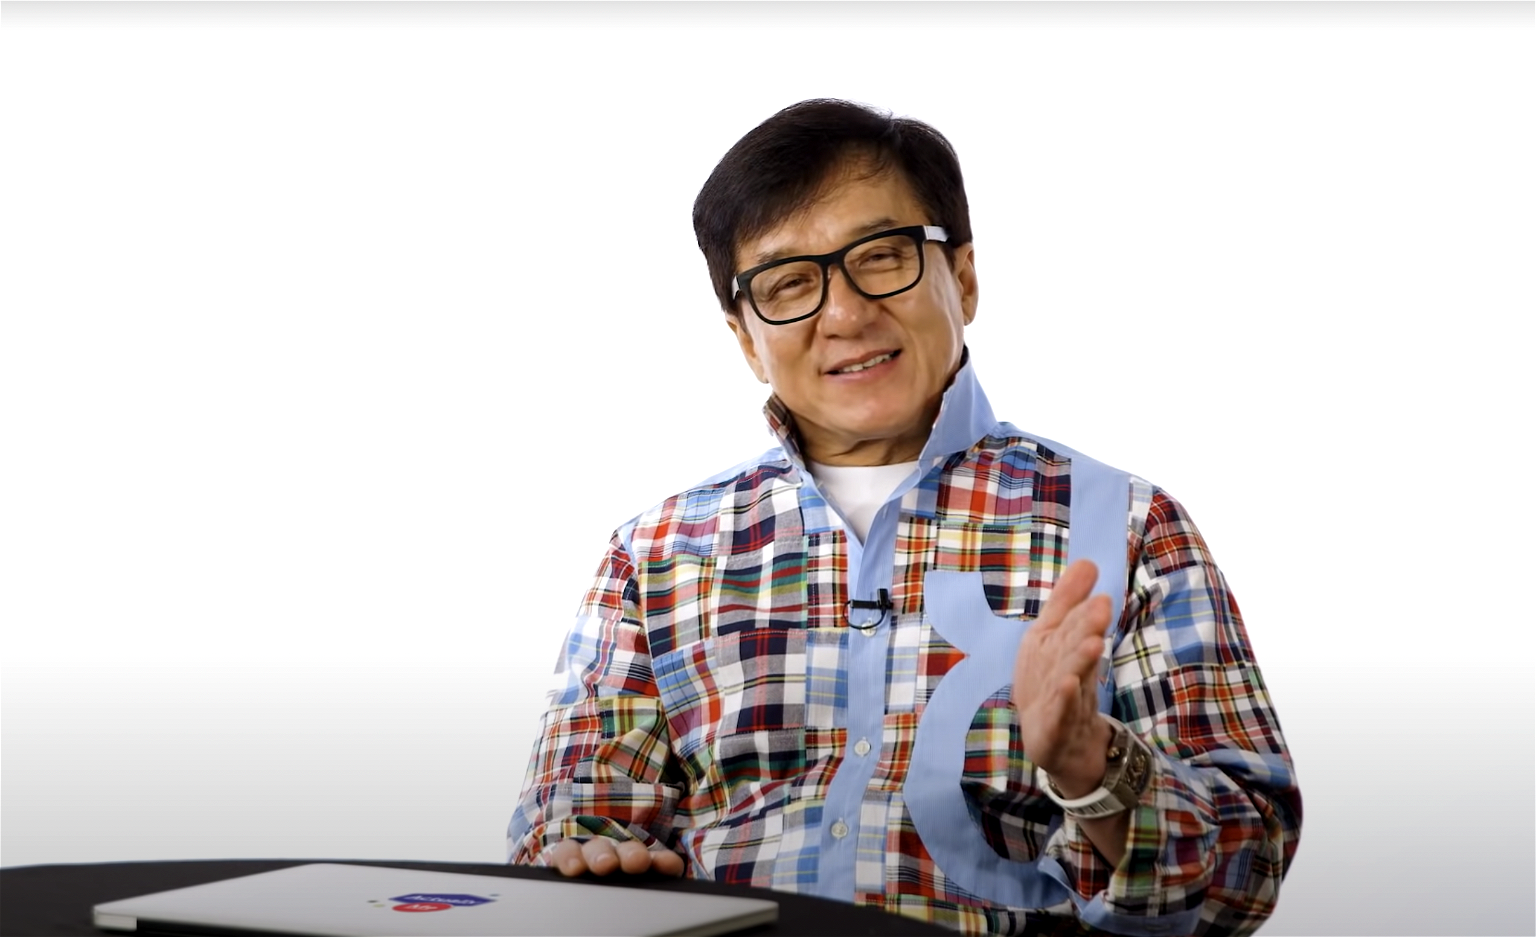 Jackie Chan reveals ‘Rush Hour 4’ is in the works